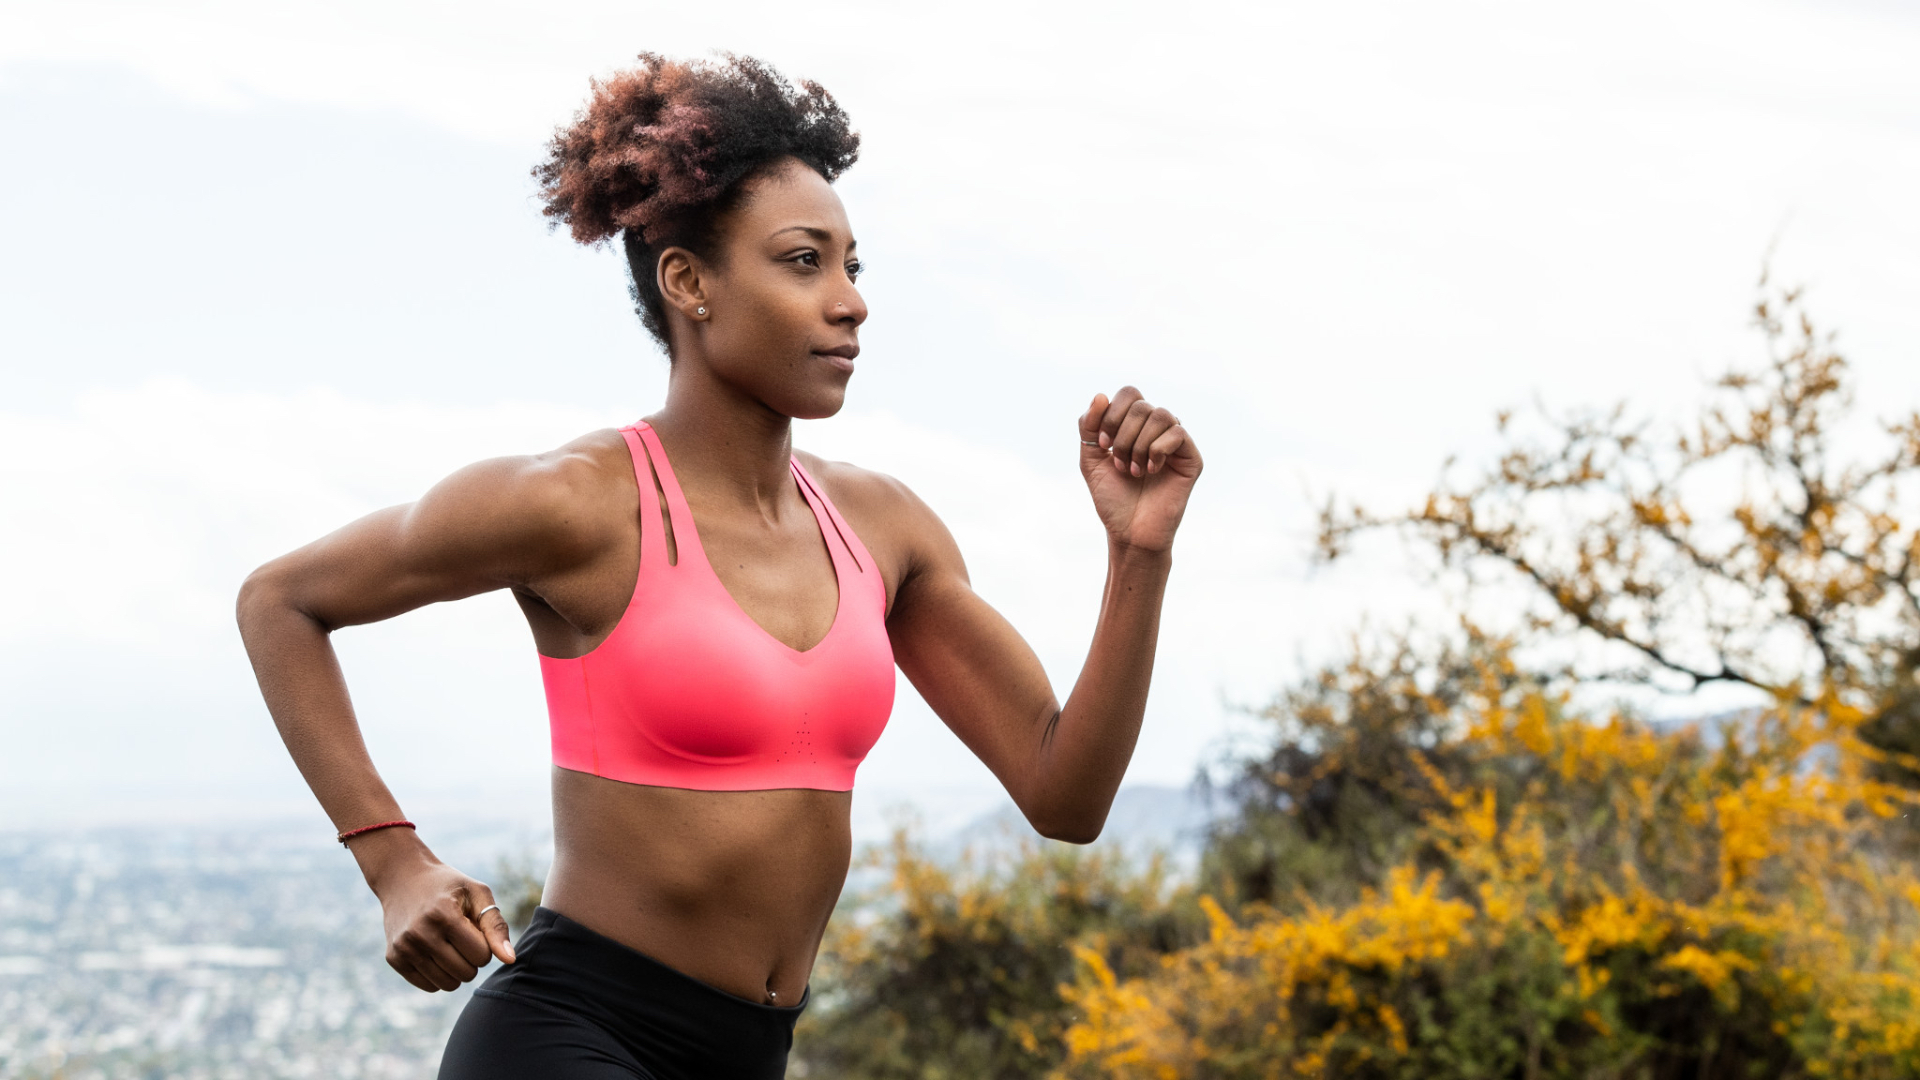 Can the right sports bra improve your running performance?